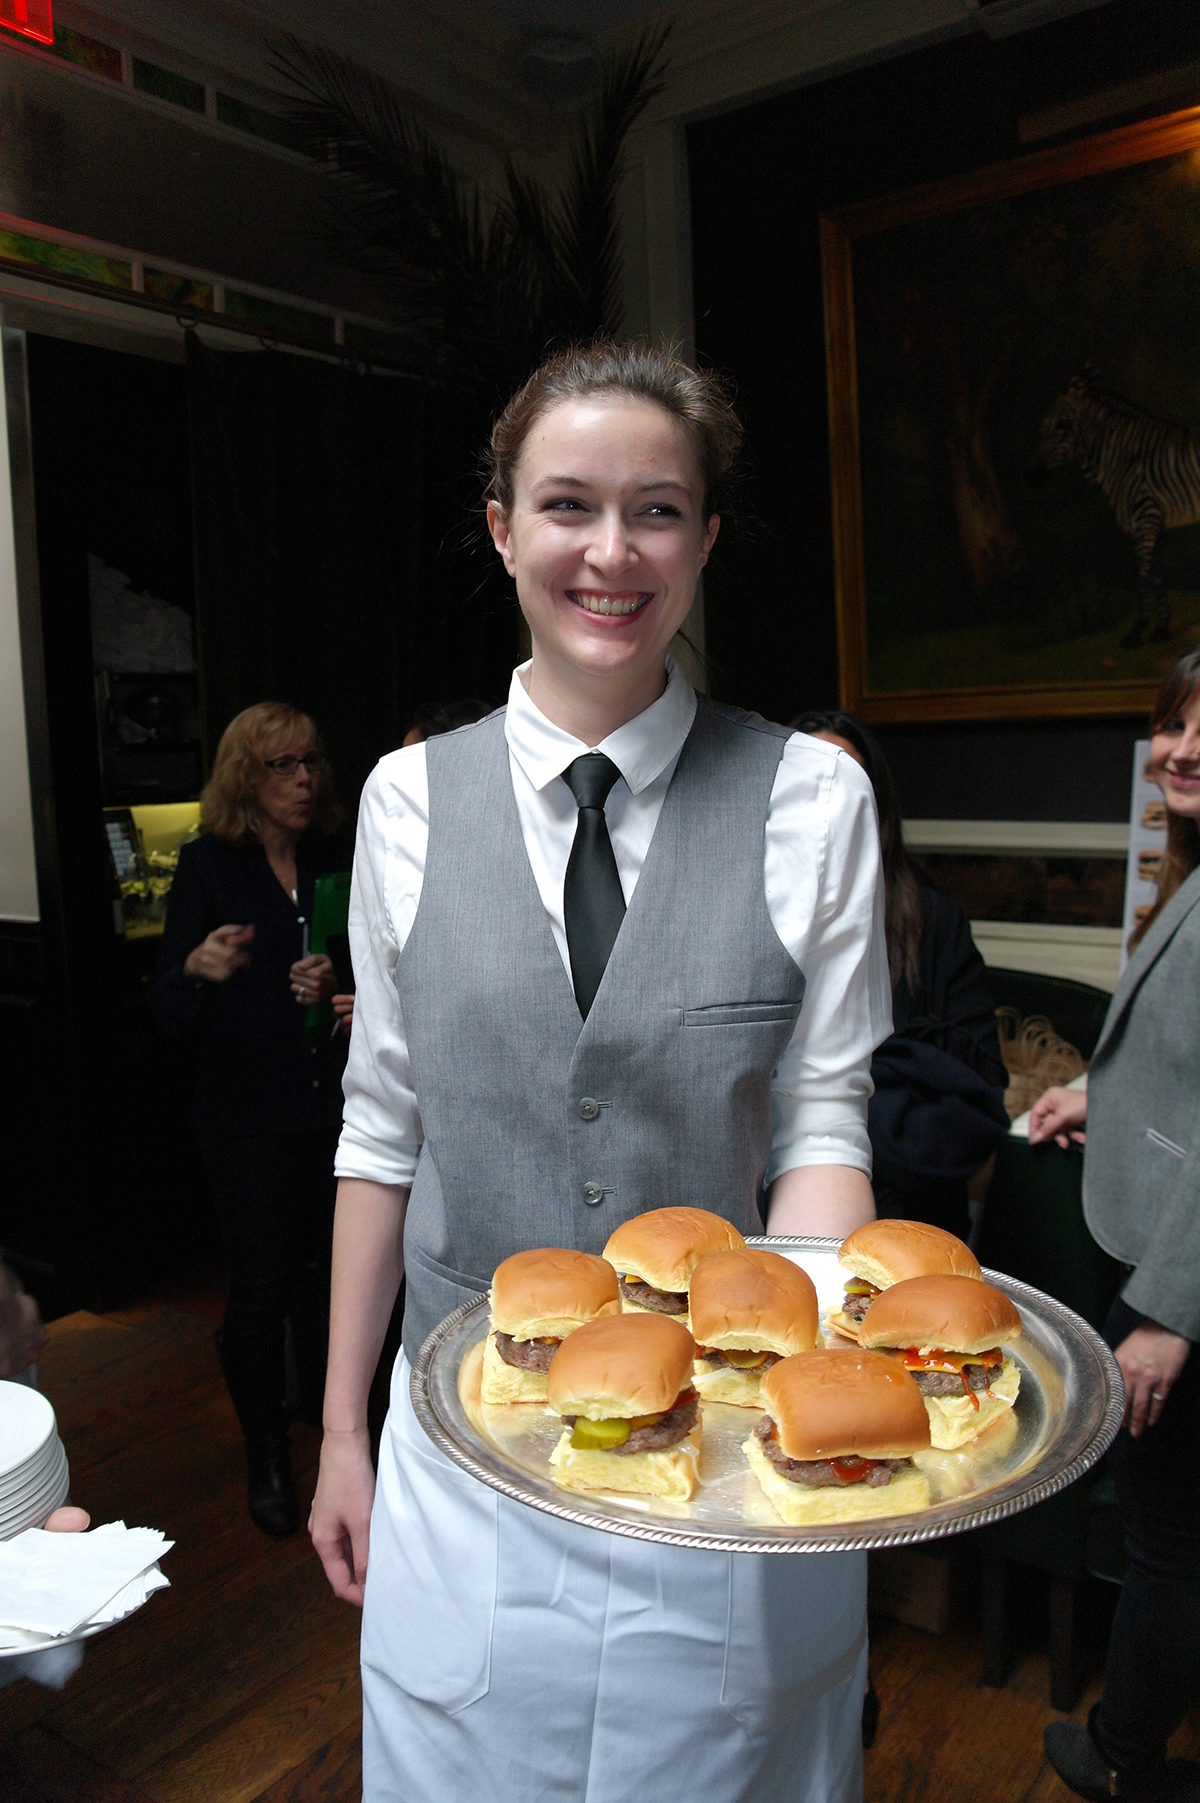 Food is served at The World is Your Burger's book launch